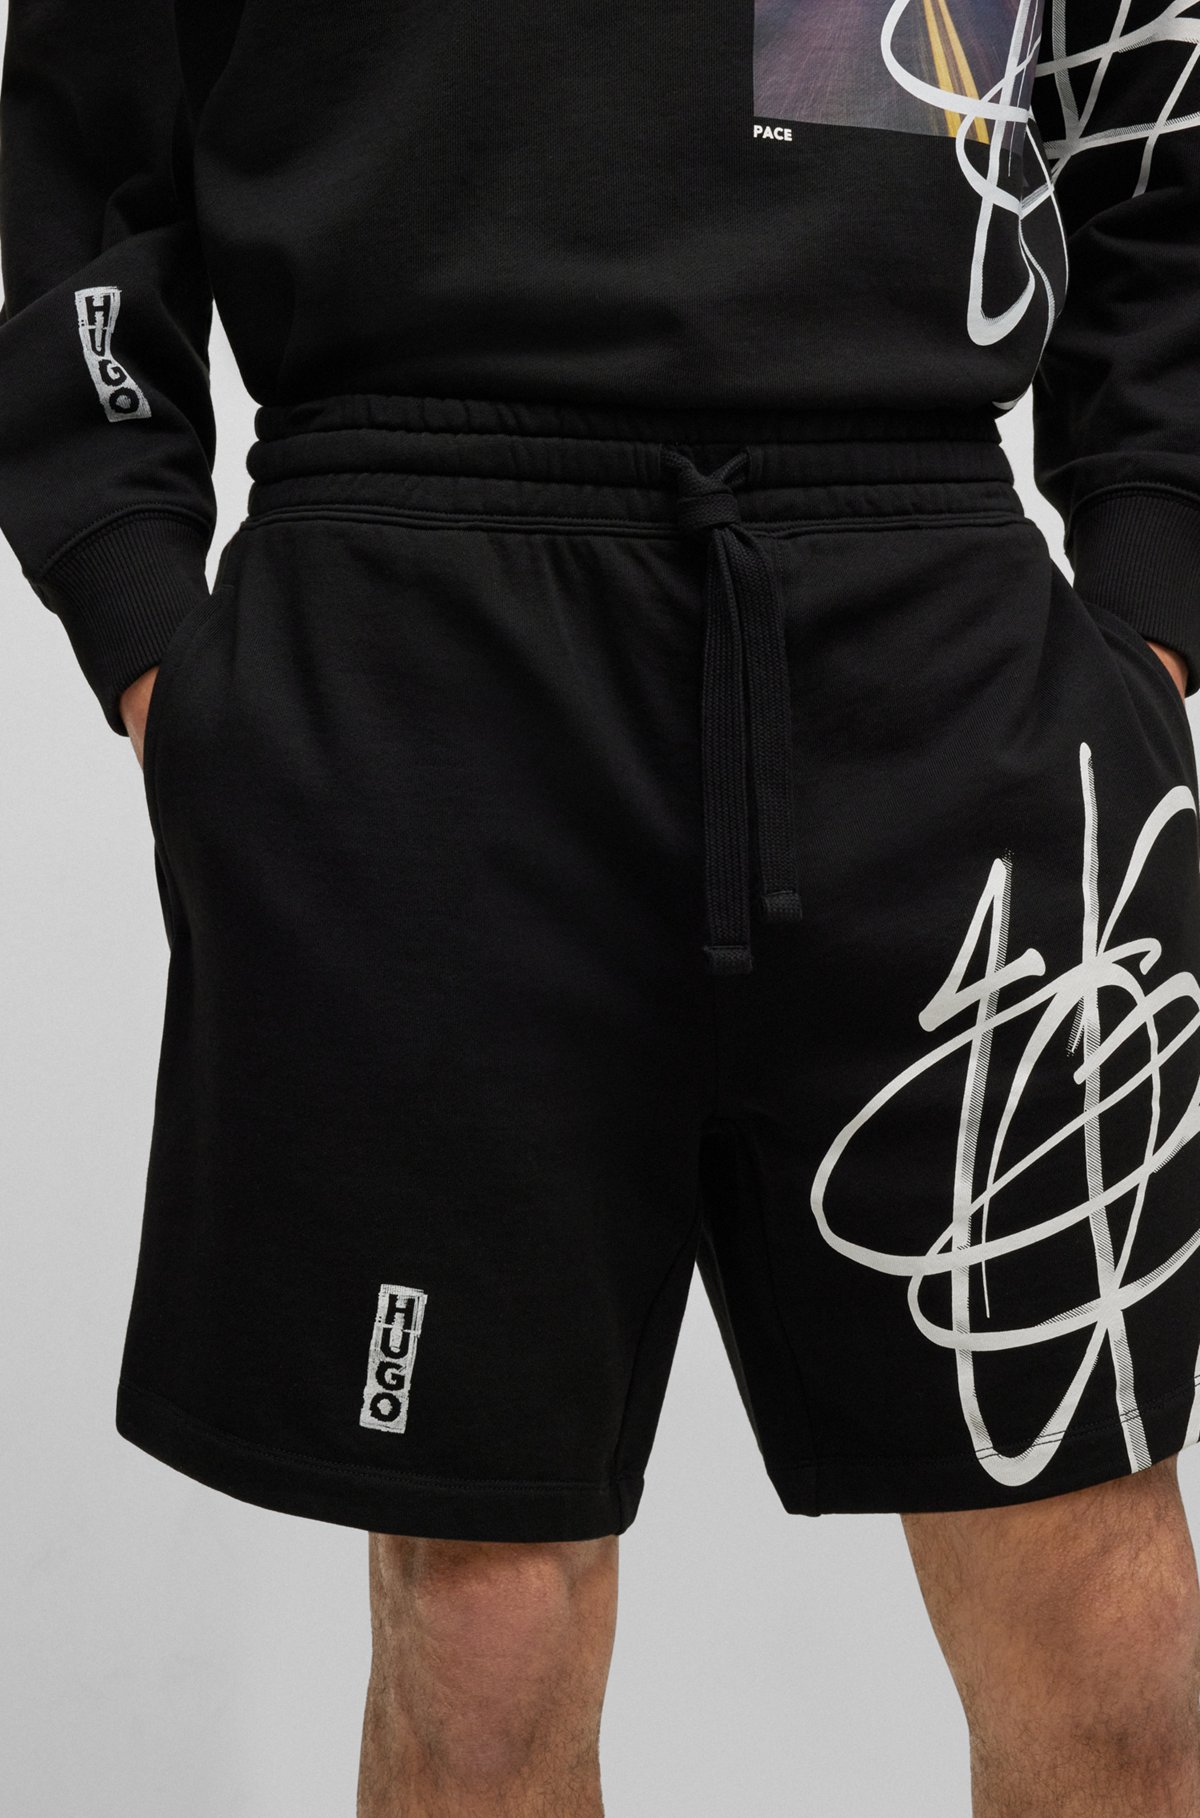 Relaxed-fit cotton shorts with graffiti-inspired logo, Black